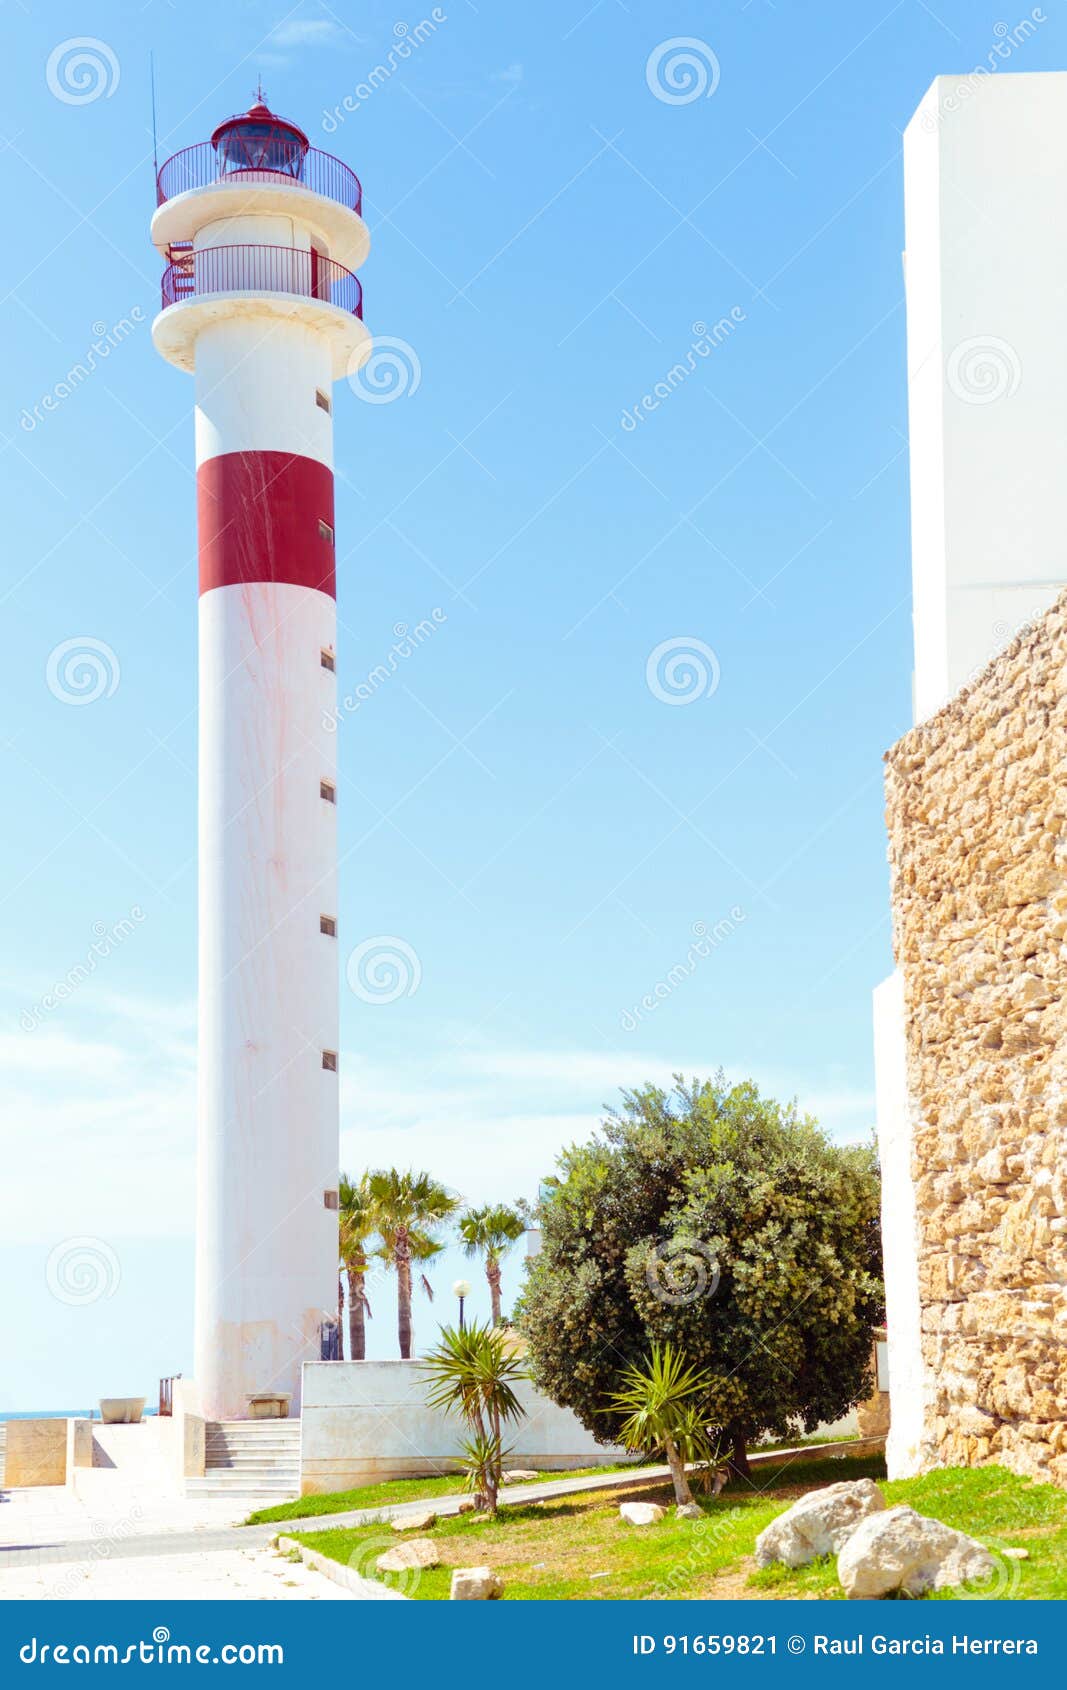 tourism in spain. view of the lighthouse in rota, cadiz, spain.